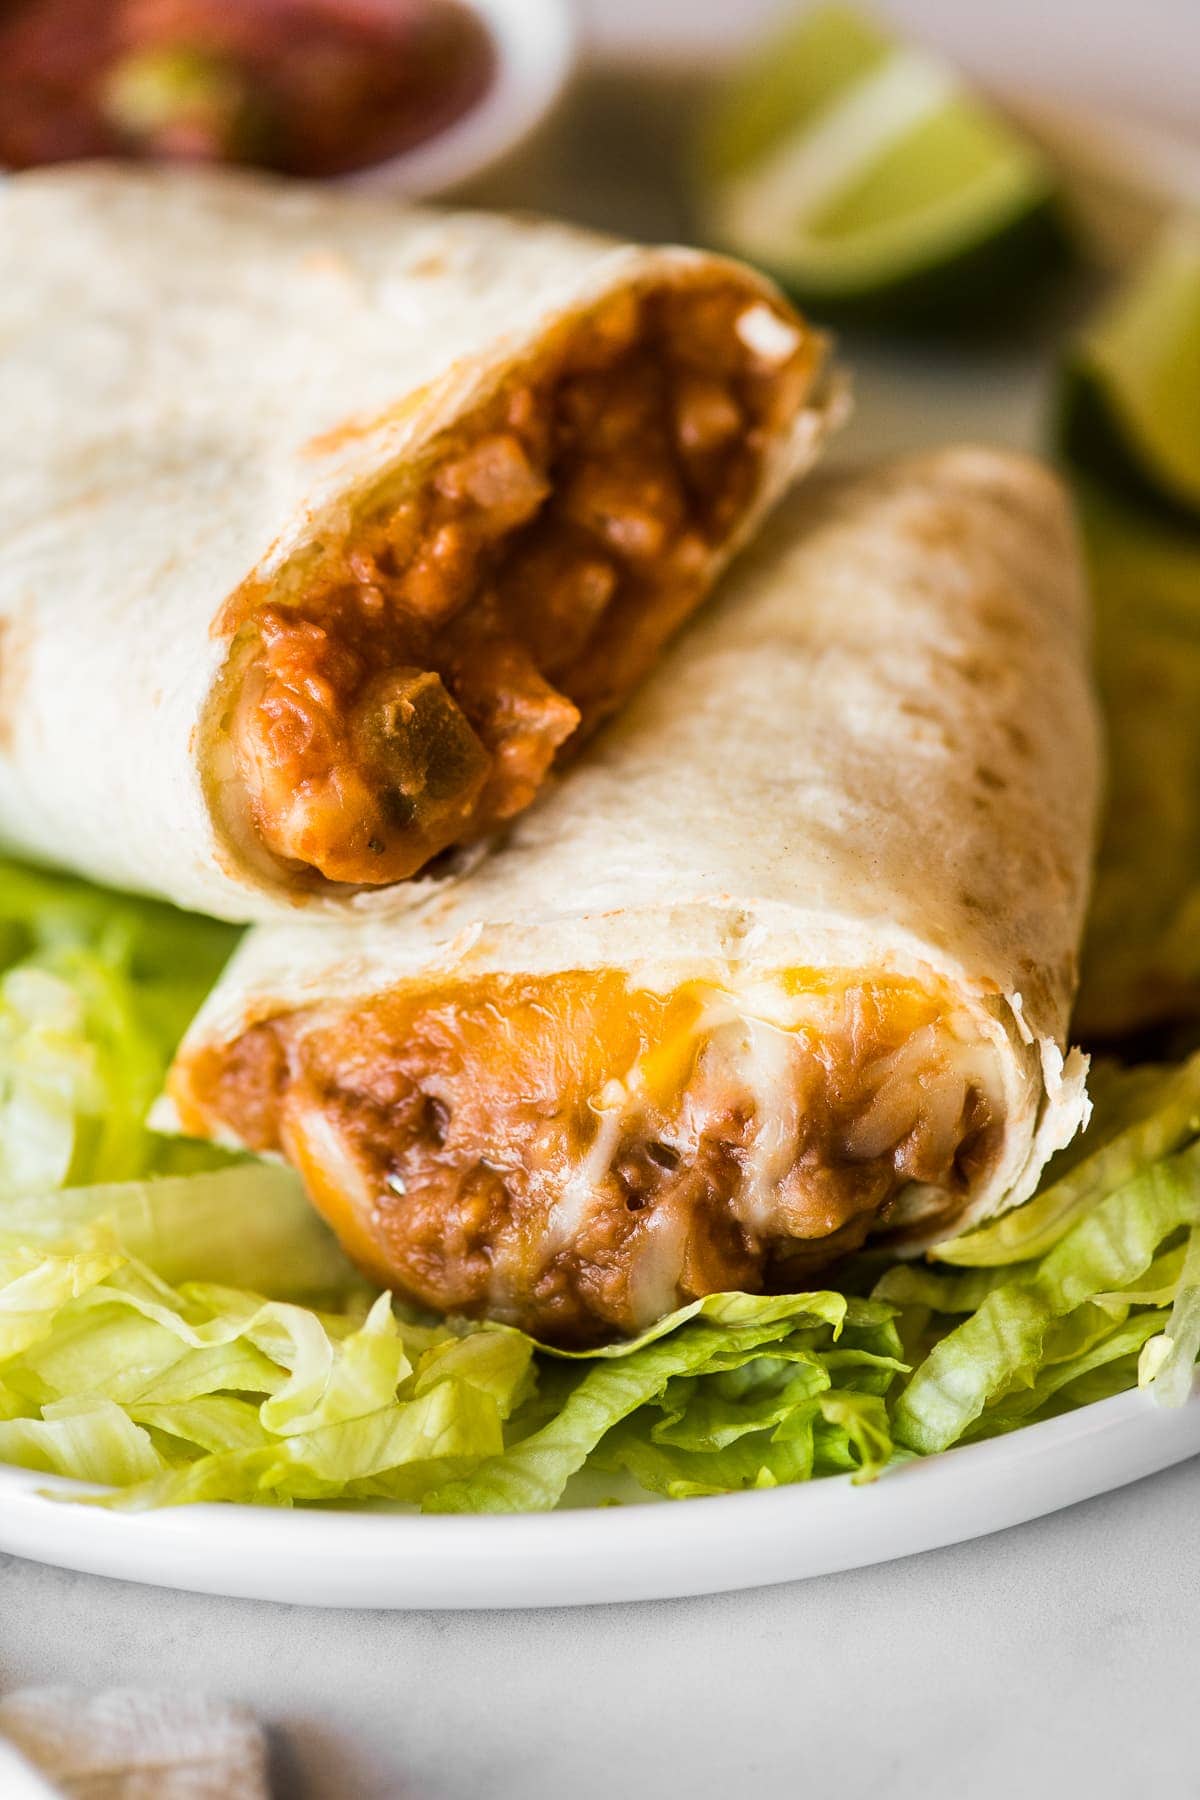 A bean and cheese burrito with melted cheese and refried beans.